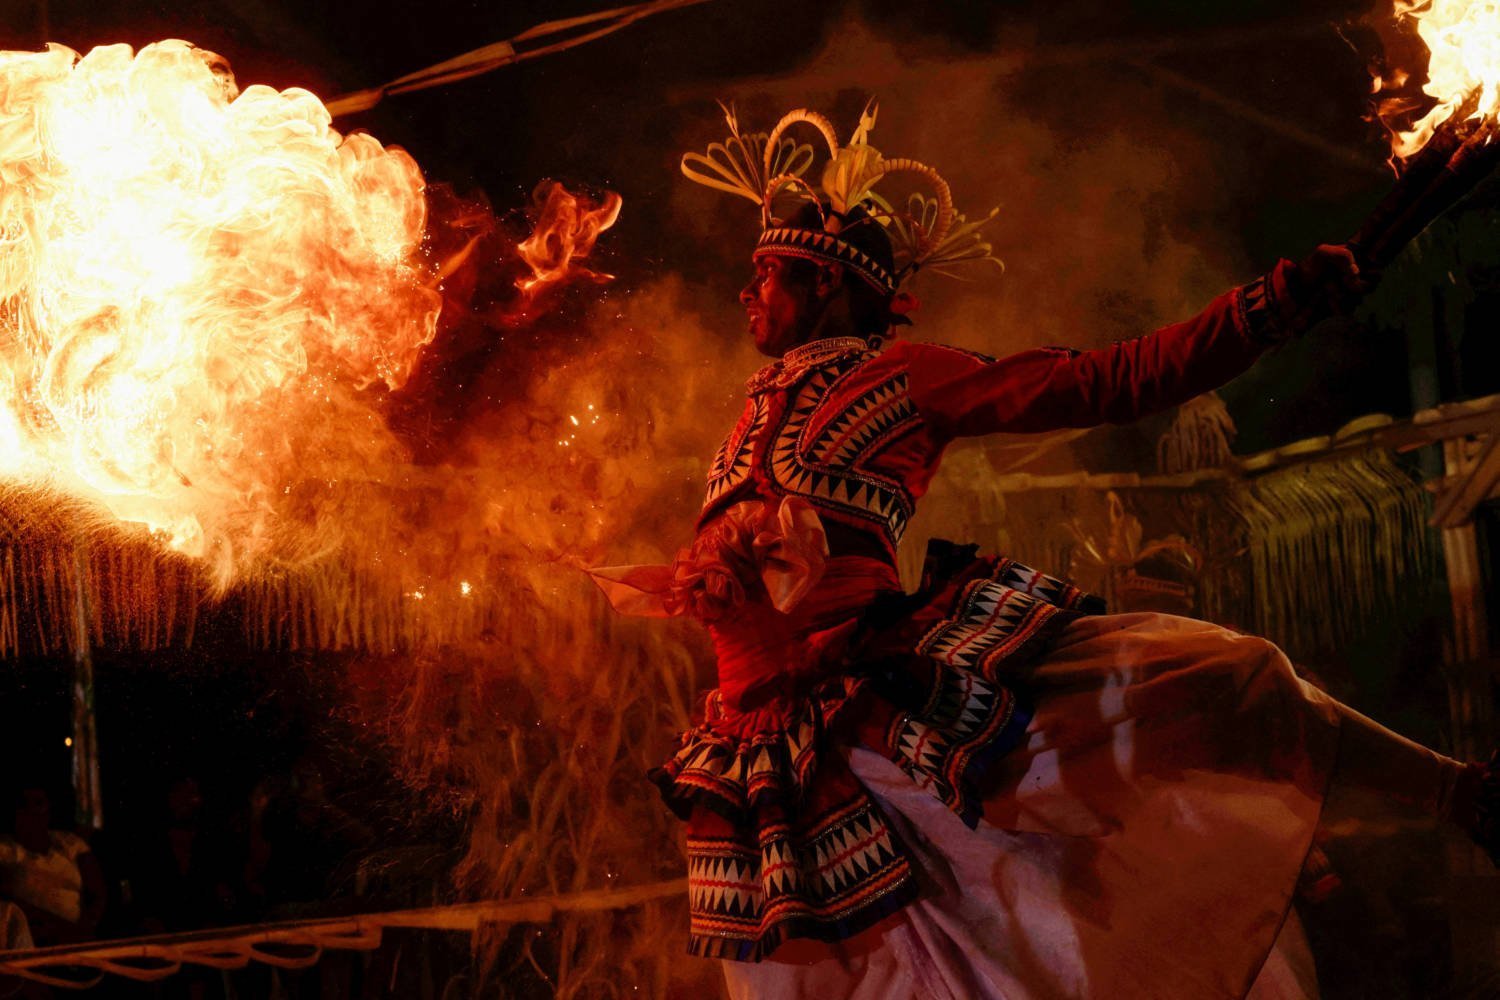 A Sri Lankan Dancer Performs With Fire At A Gammaduwa Performance In Colombo